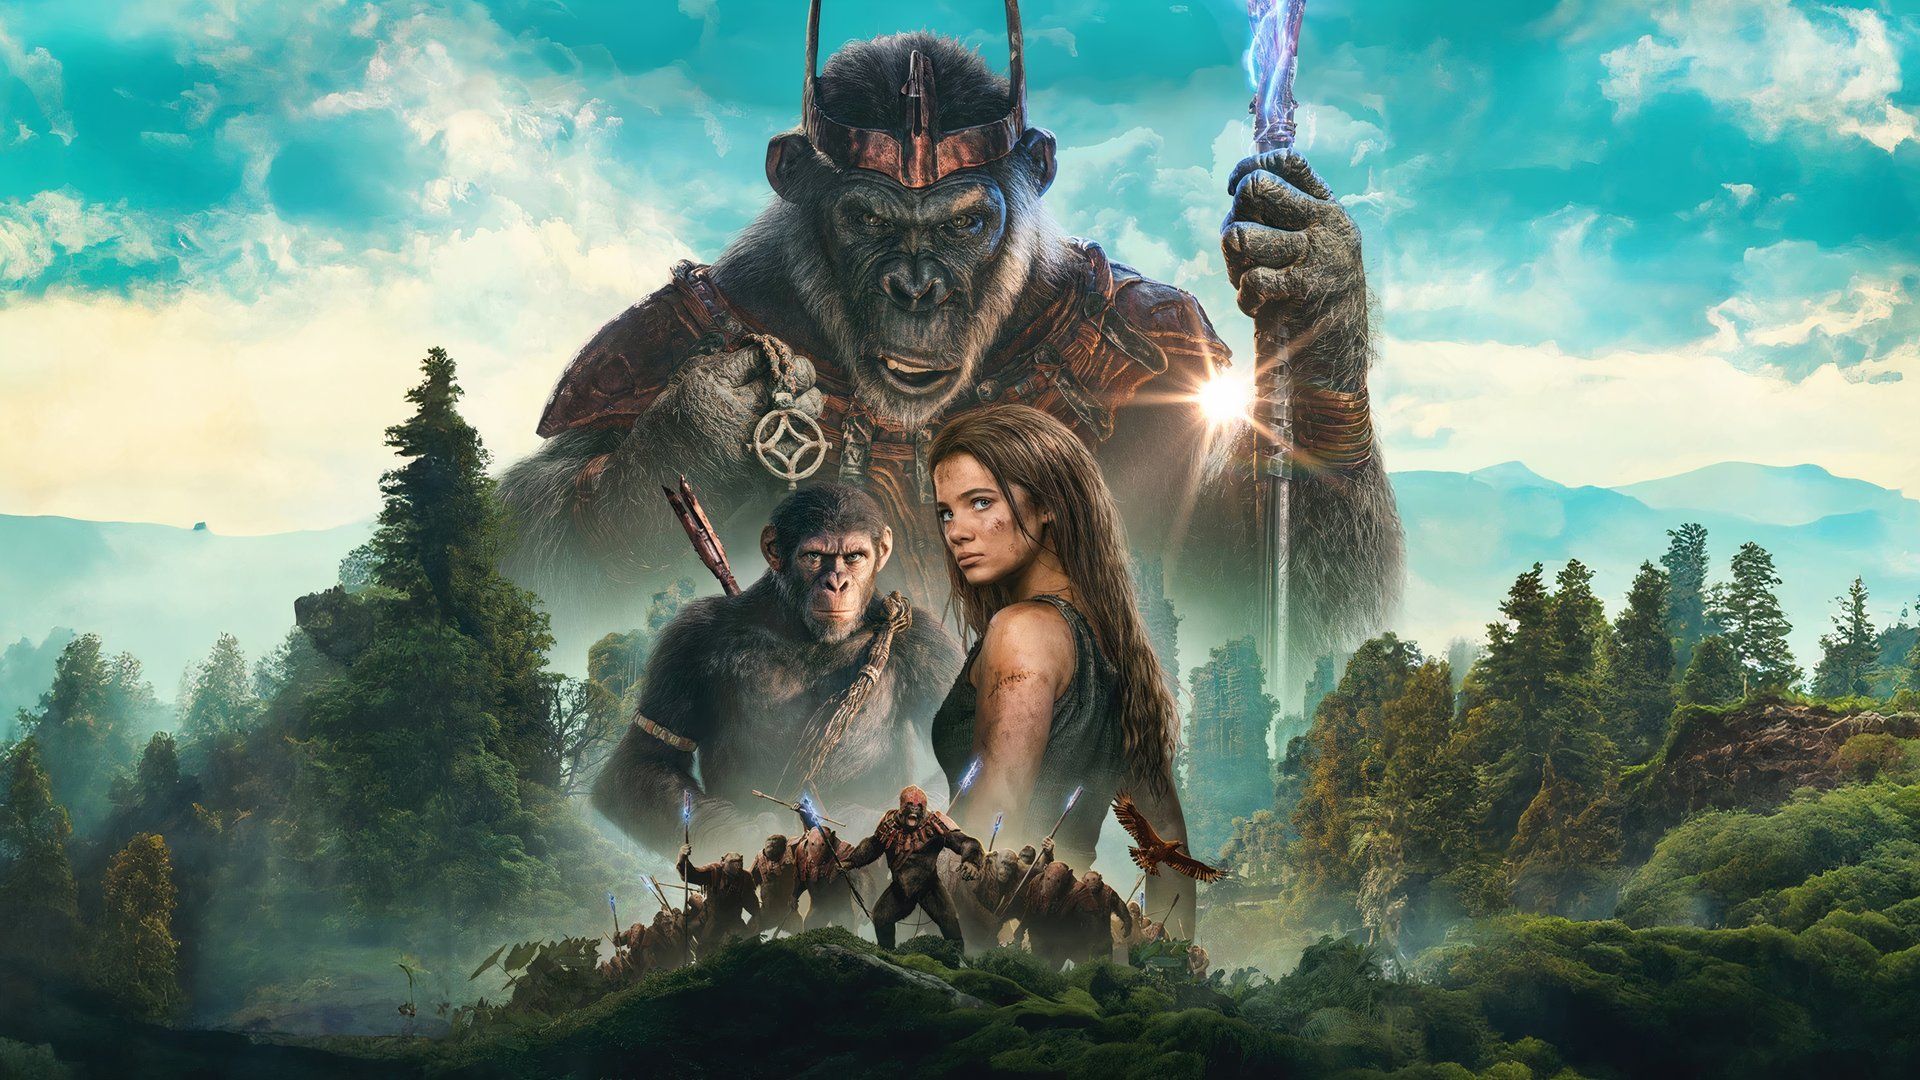 The Kingdom of the Planet of the Apes cast including Noa, Proximus, and Mae